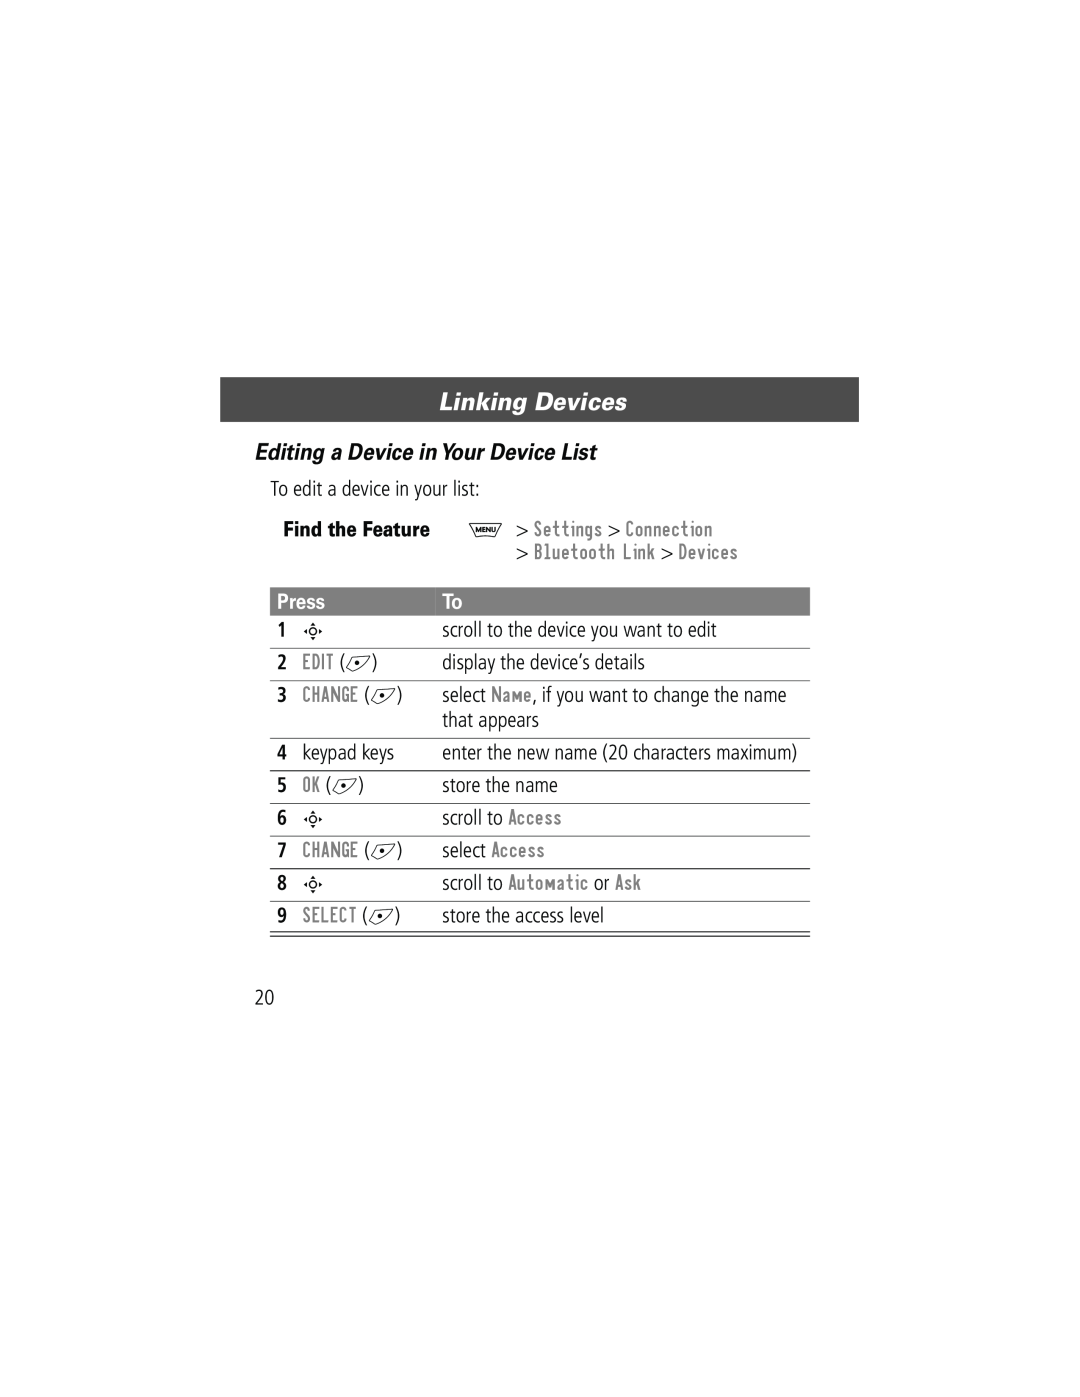 Motorola Bluetooth Module manual Editing a Device in Your Device List, Linking Devices, Press 